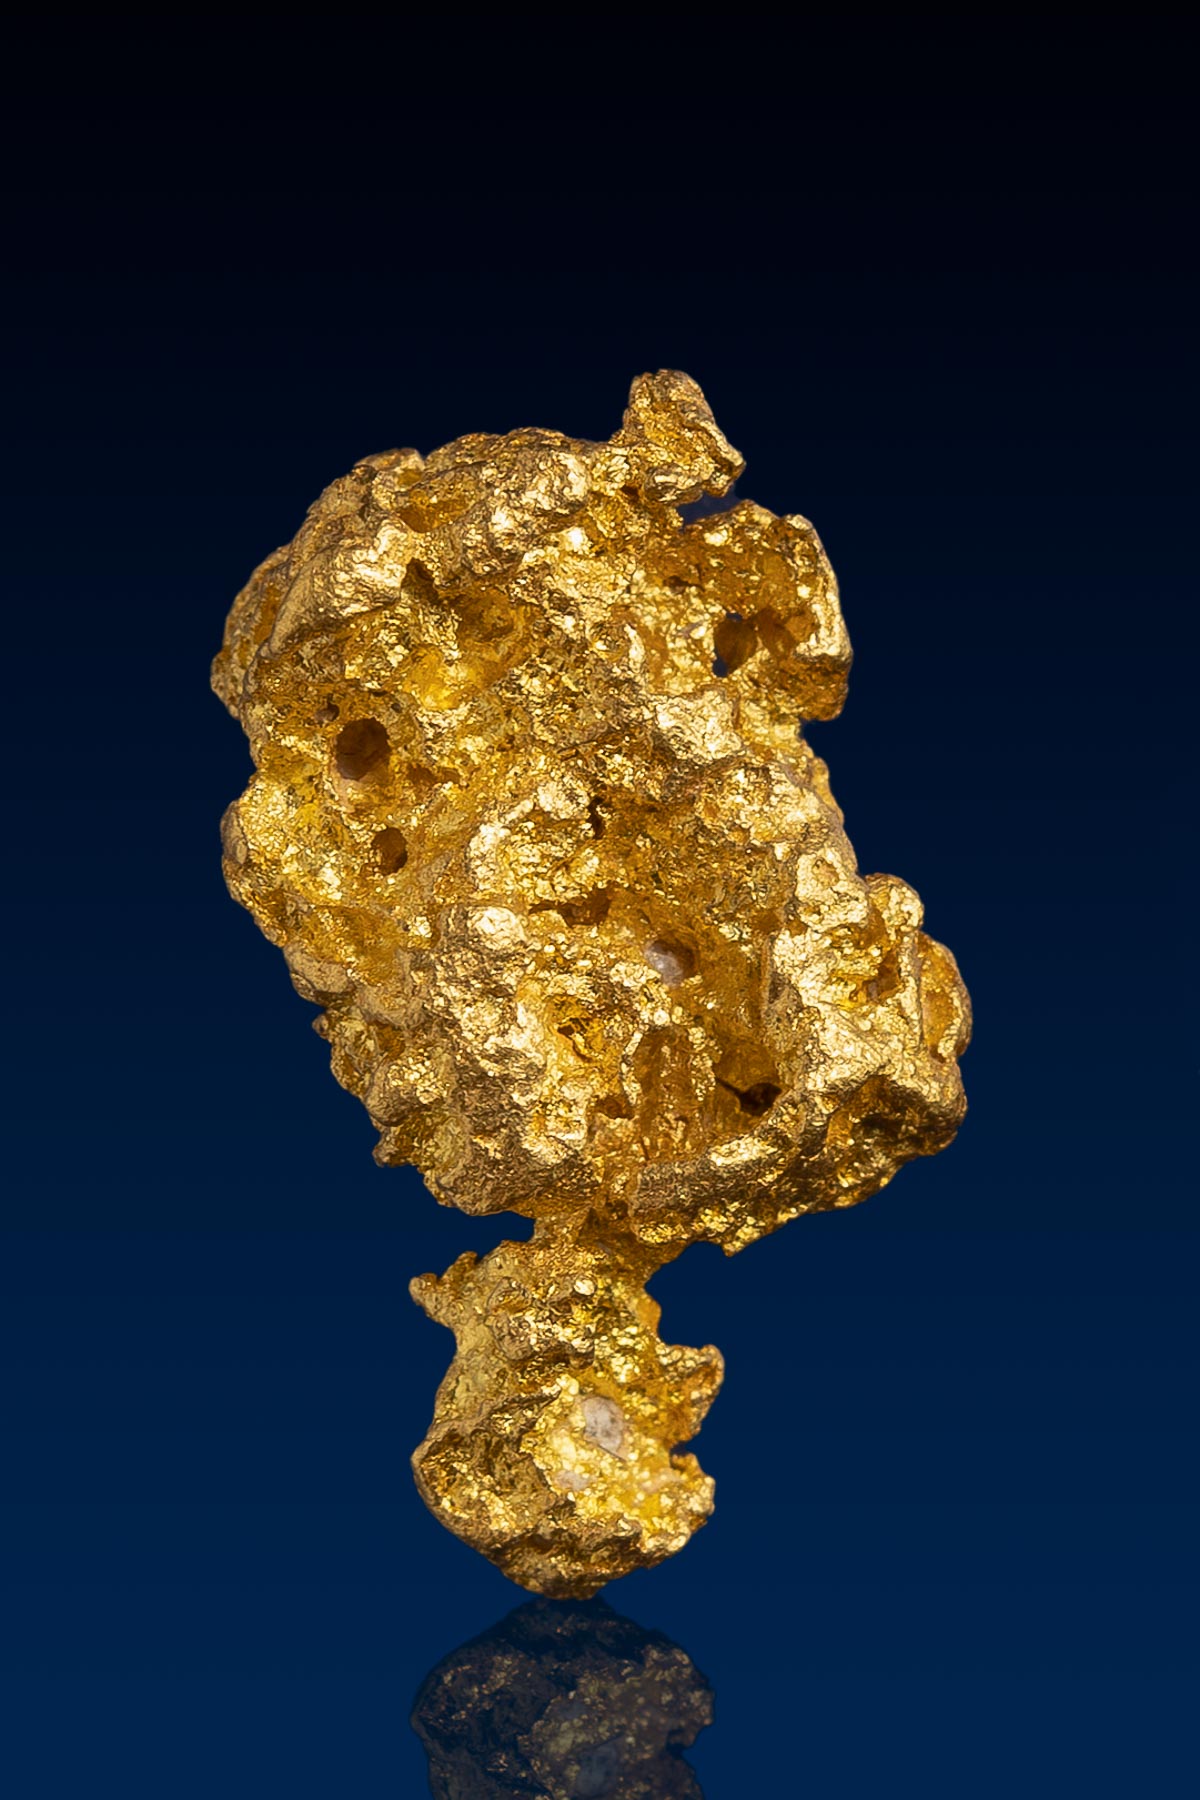 Australian Natural Gold Nugget on a Stand - 2.95 grams